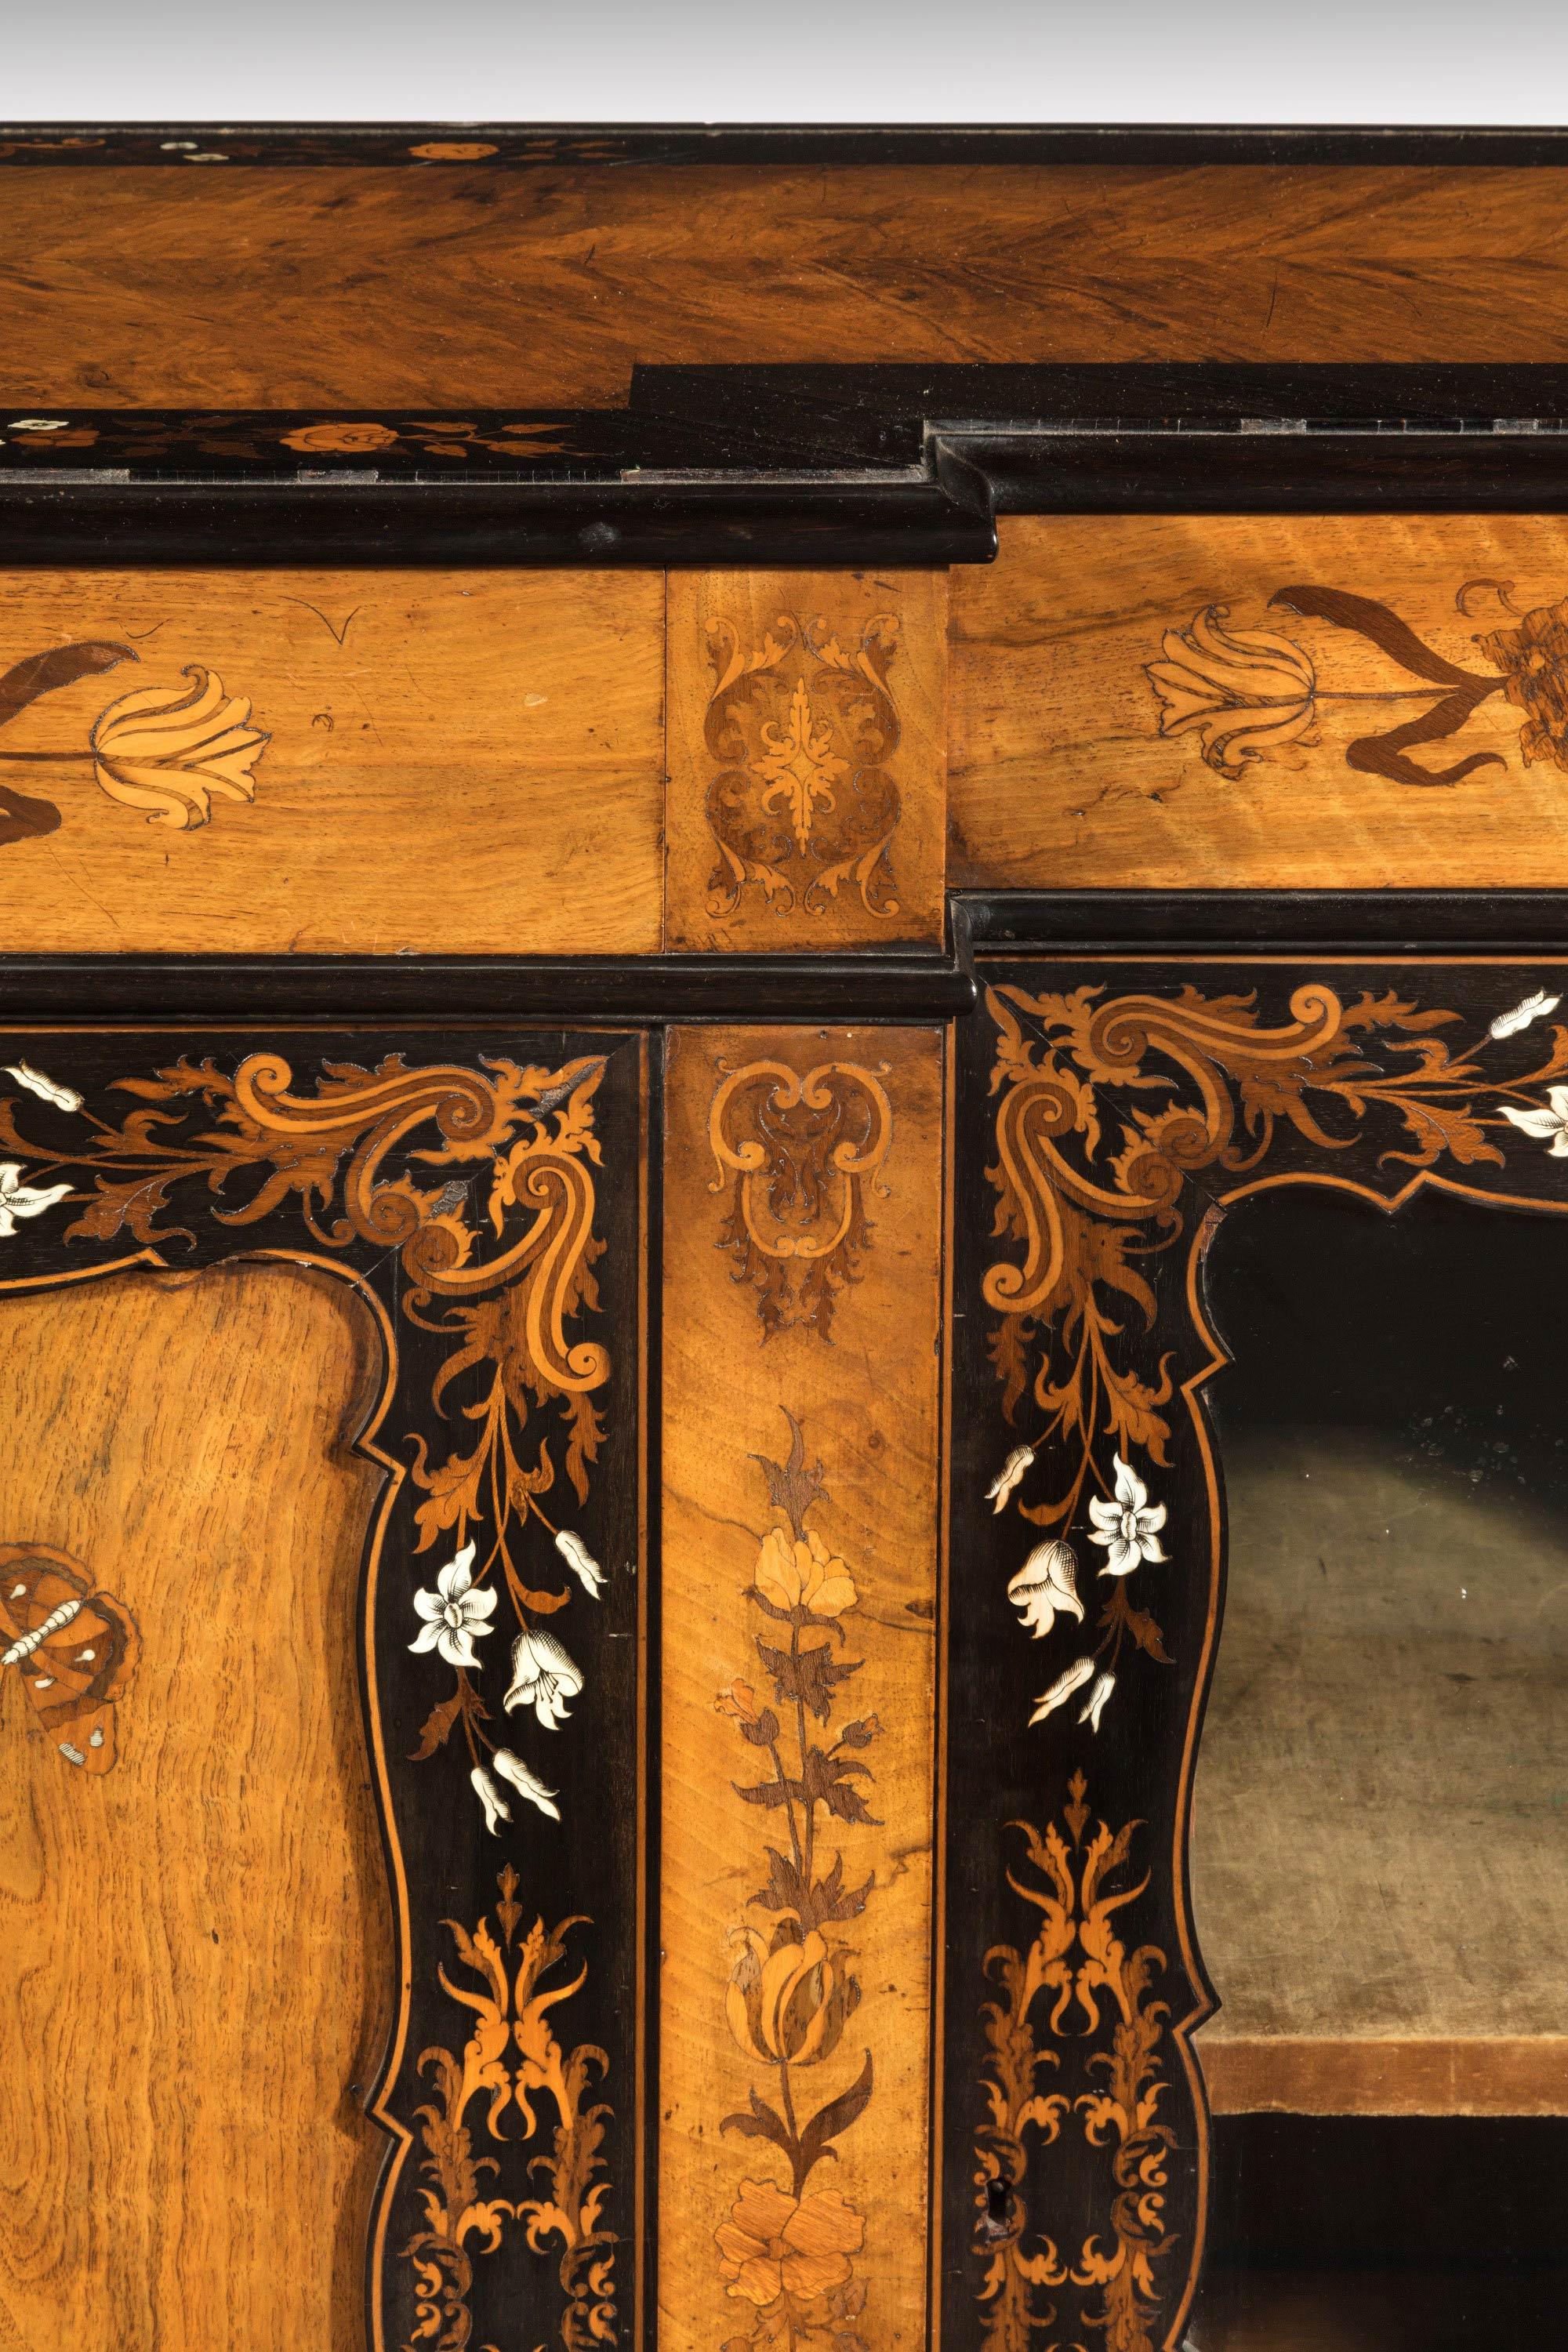 A quite exceptional 19th century Kingwood breakfront side cabinet with beautifully applied marquetry decoration in exotic timbers. In an entirely original and unrestored condition.